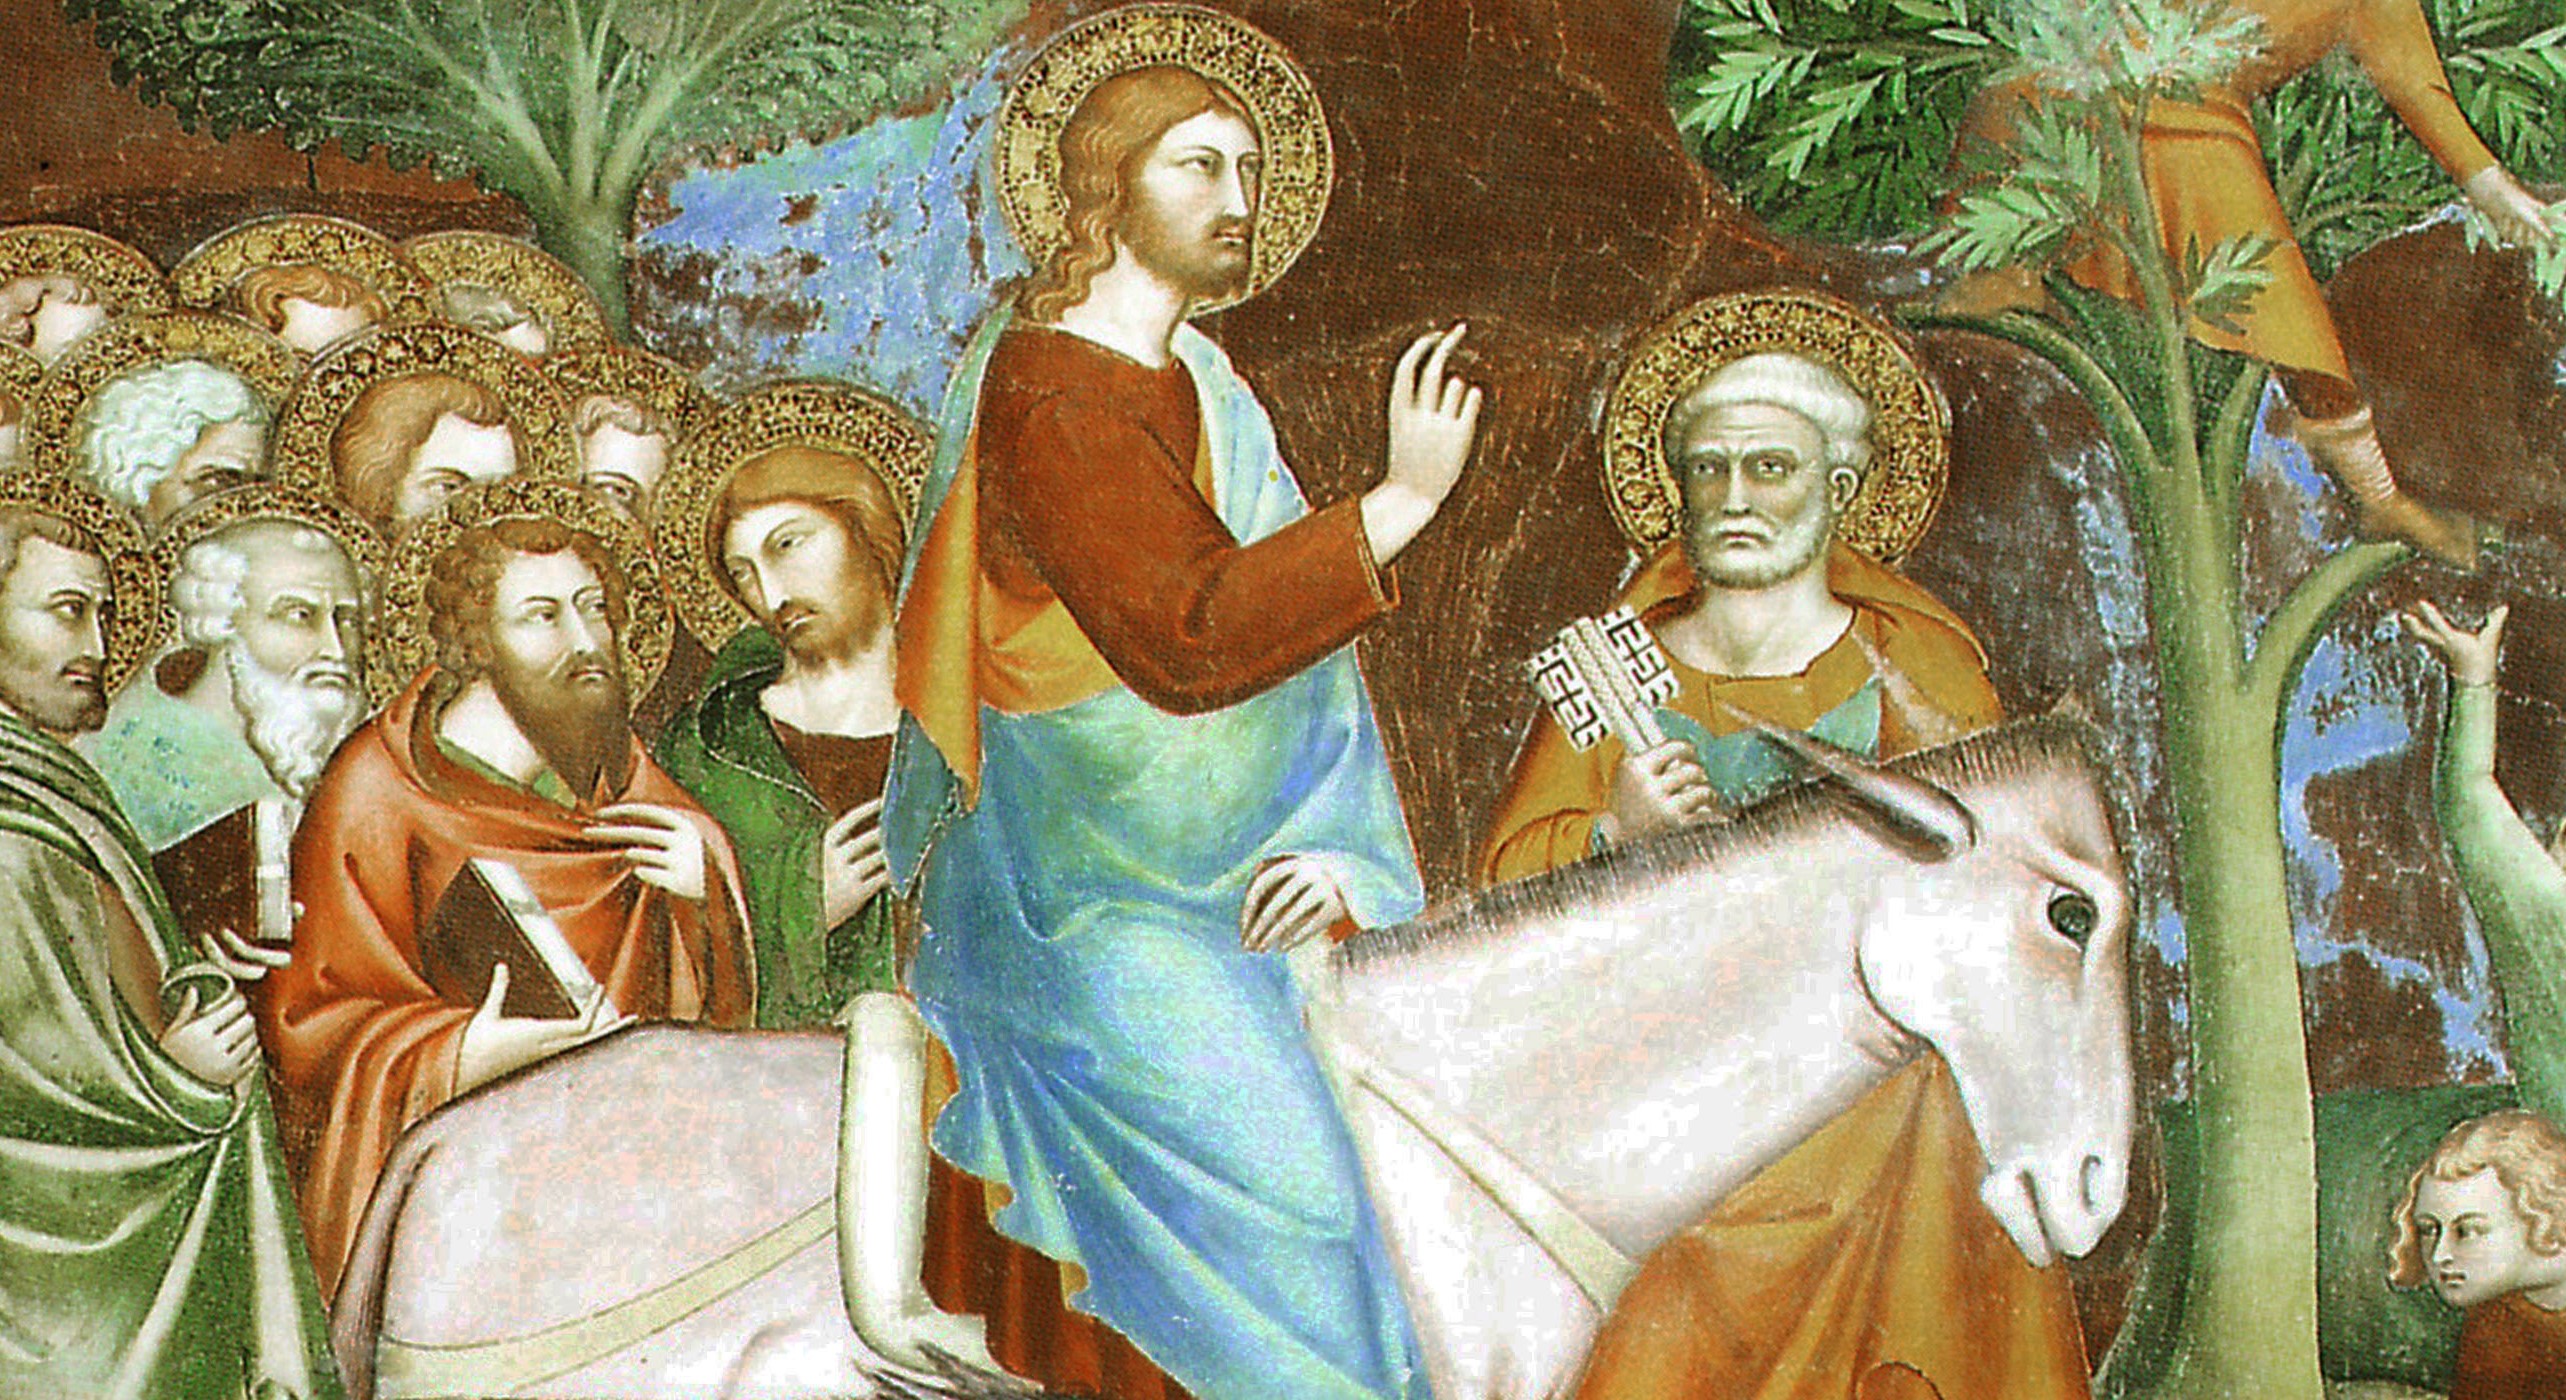 Are we ready to say: "Your will be done"? A Reflection for Palm Sunday by Abbot Primate Gregory J. Polan